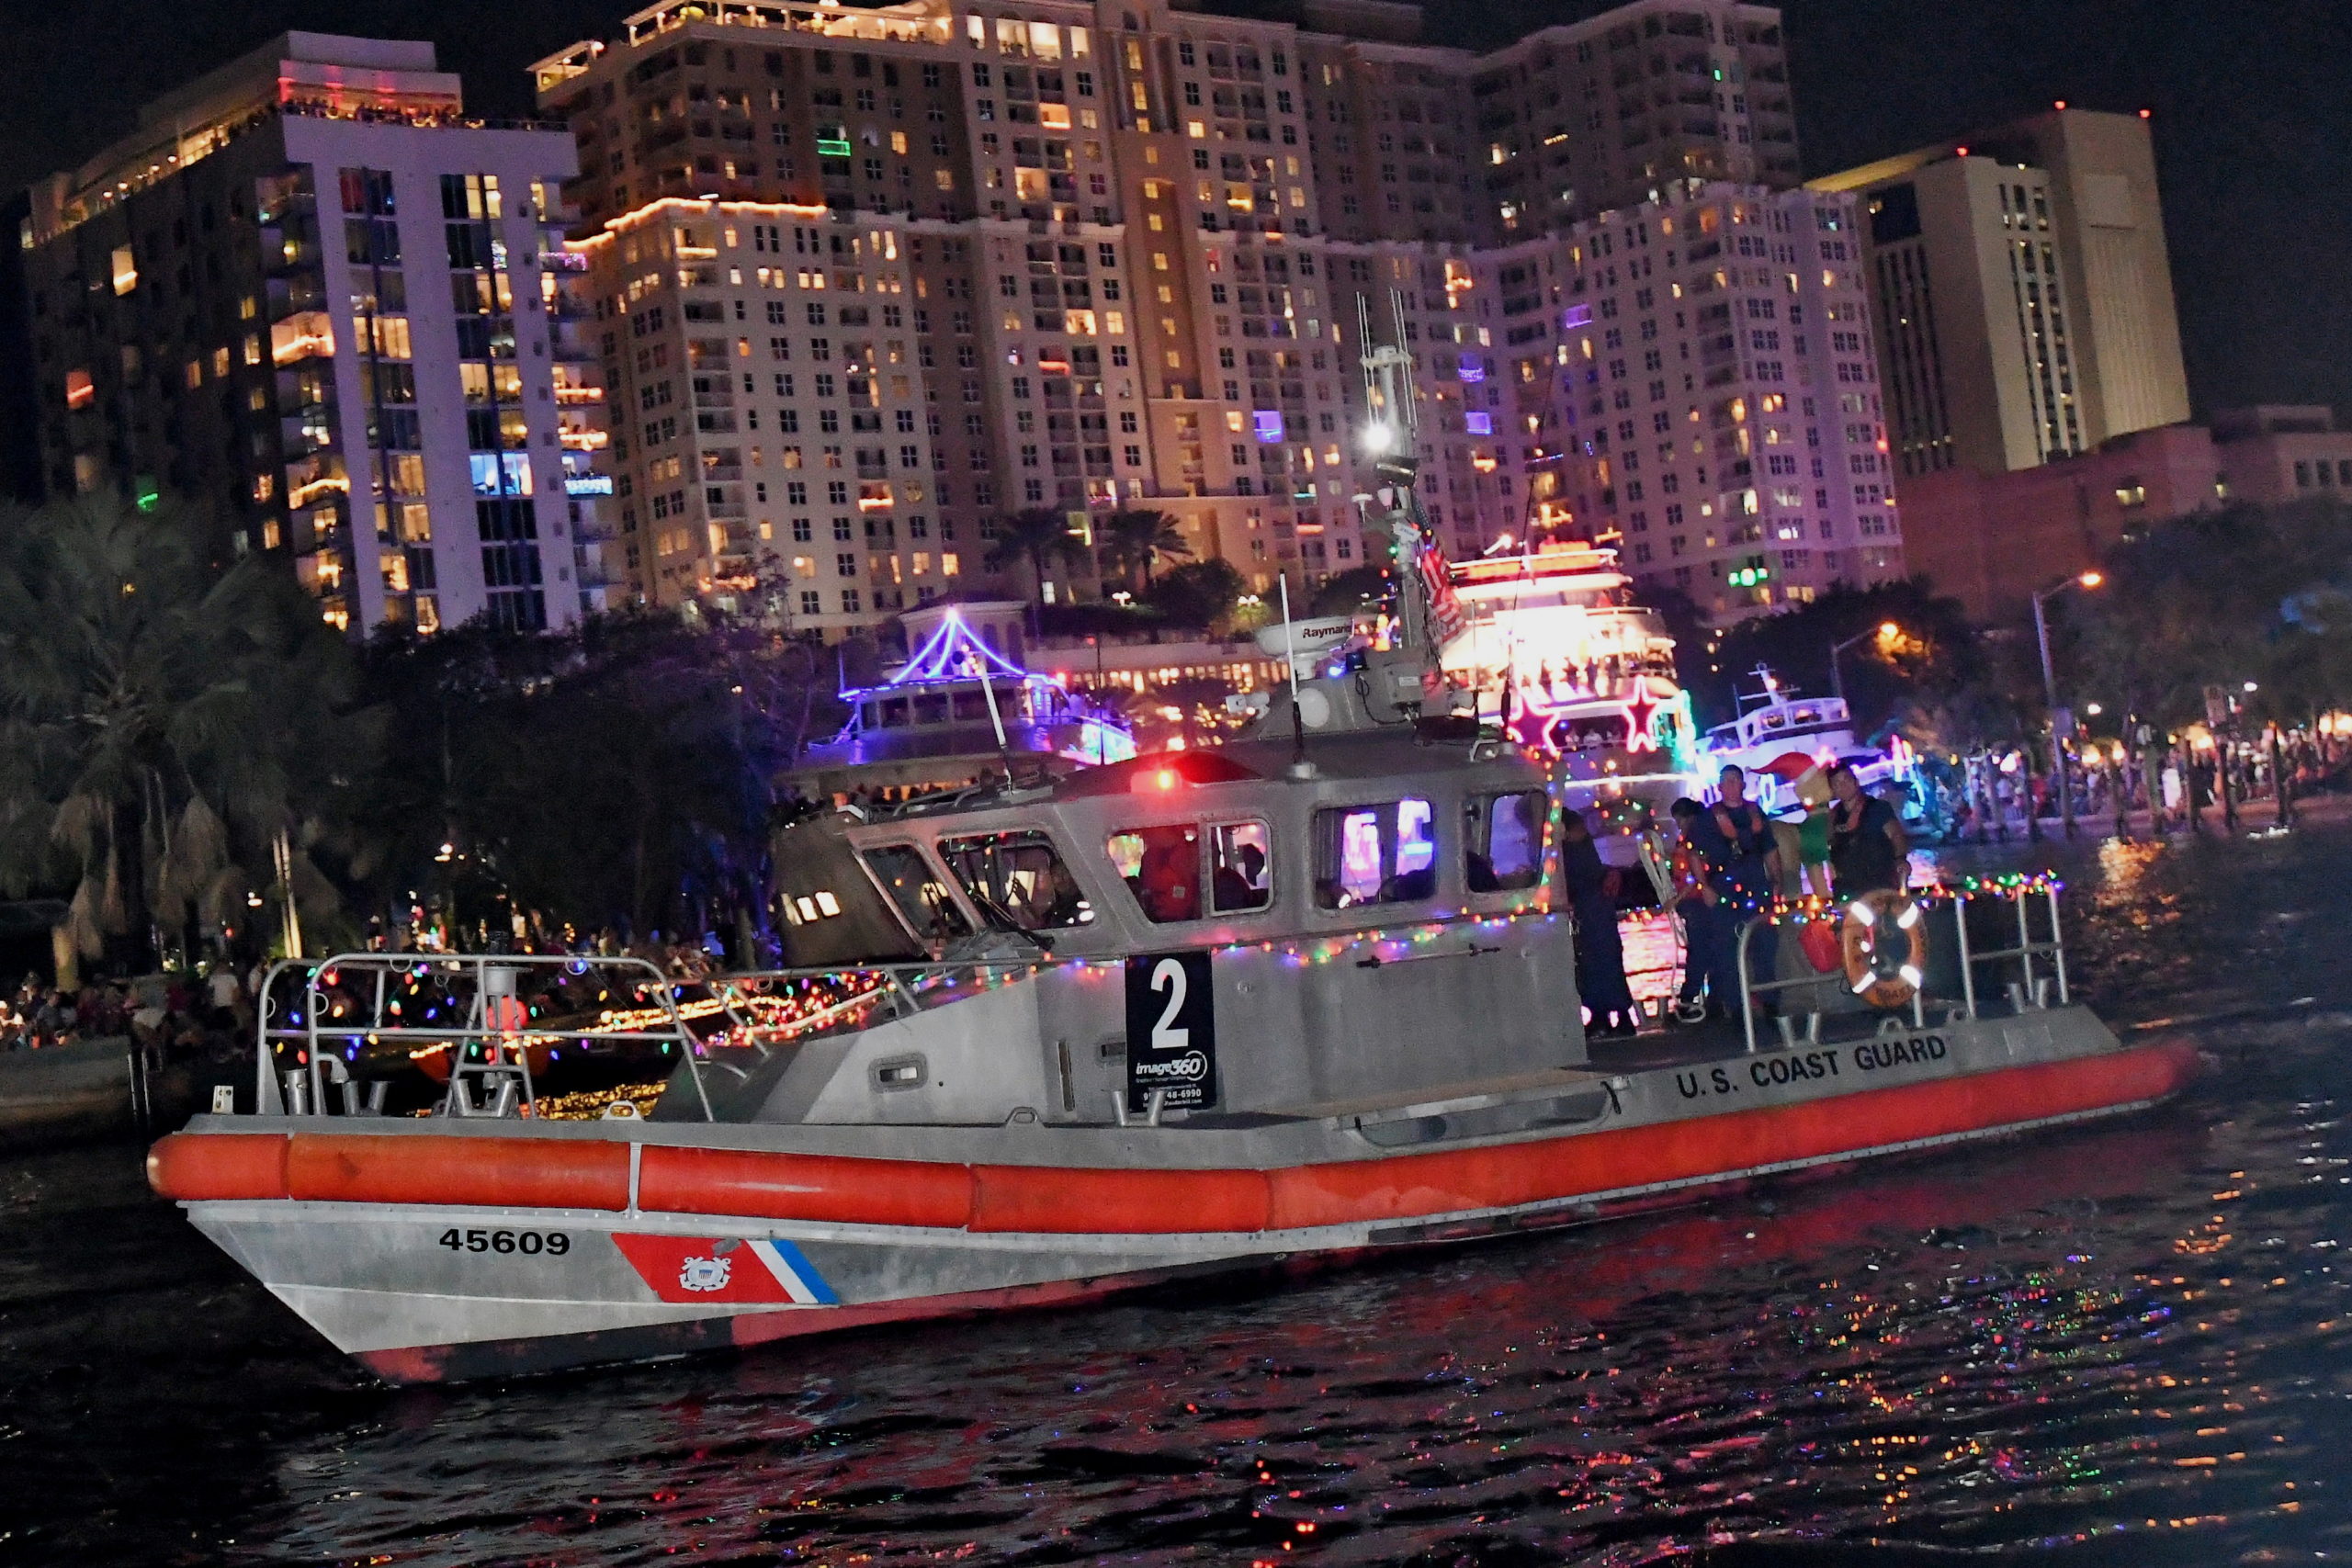 U.S. Coast Guard #45, boat number 2 in the 2022 Winterfest Boat Parade